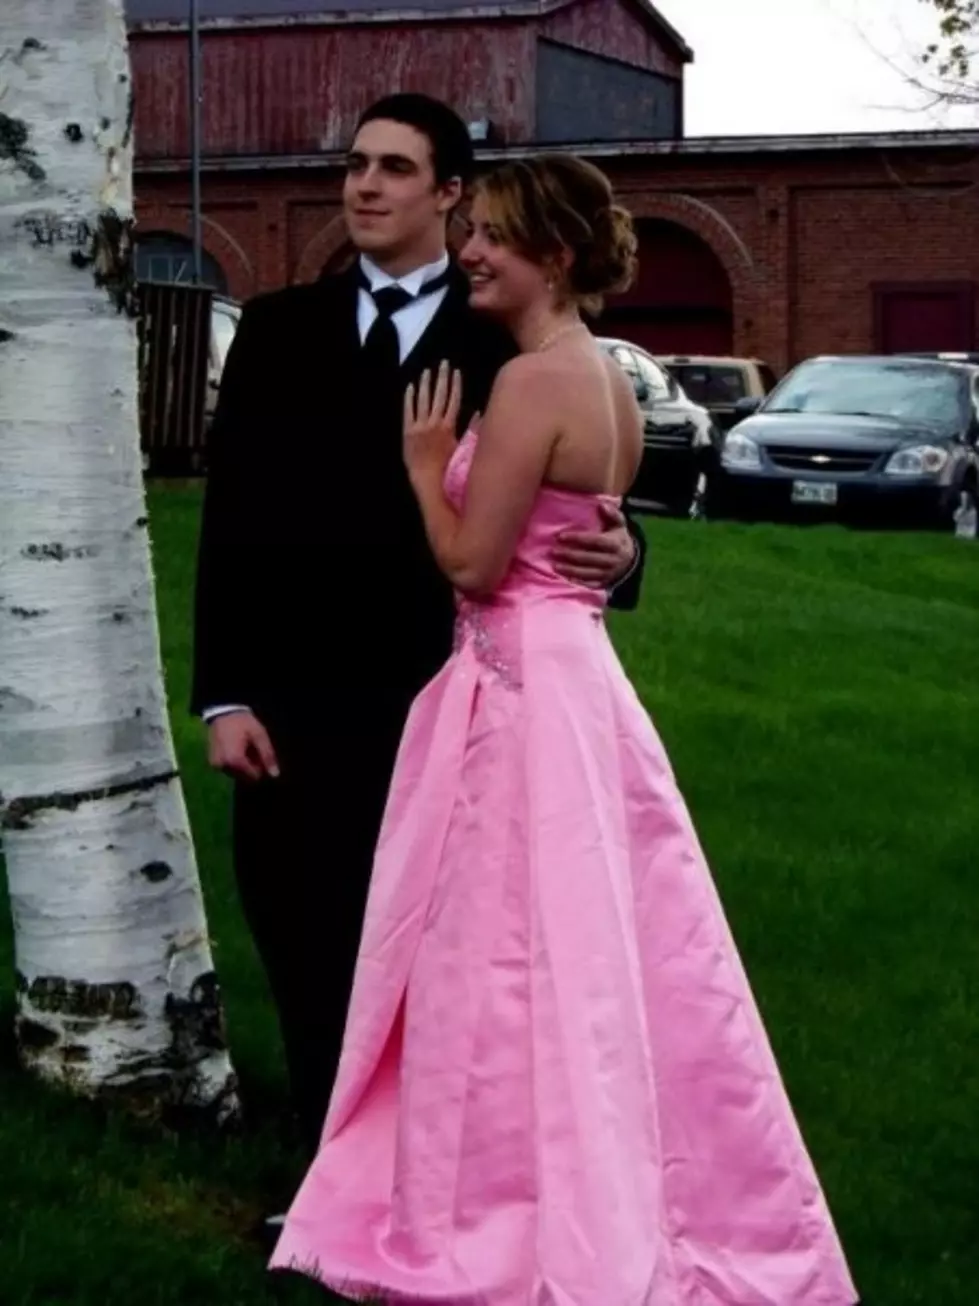 5 Great Places to Take Prom Photos Near Bangor